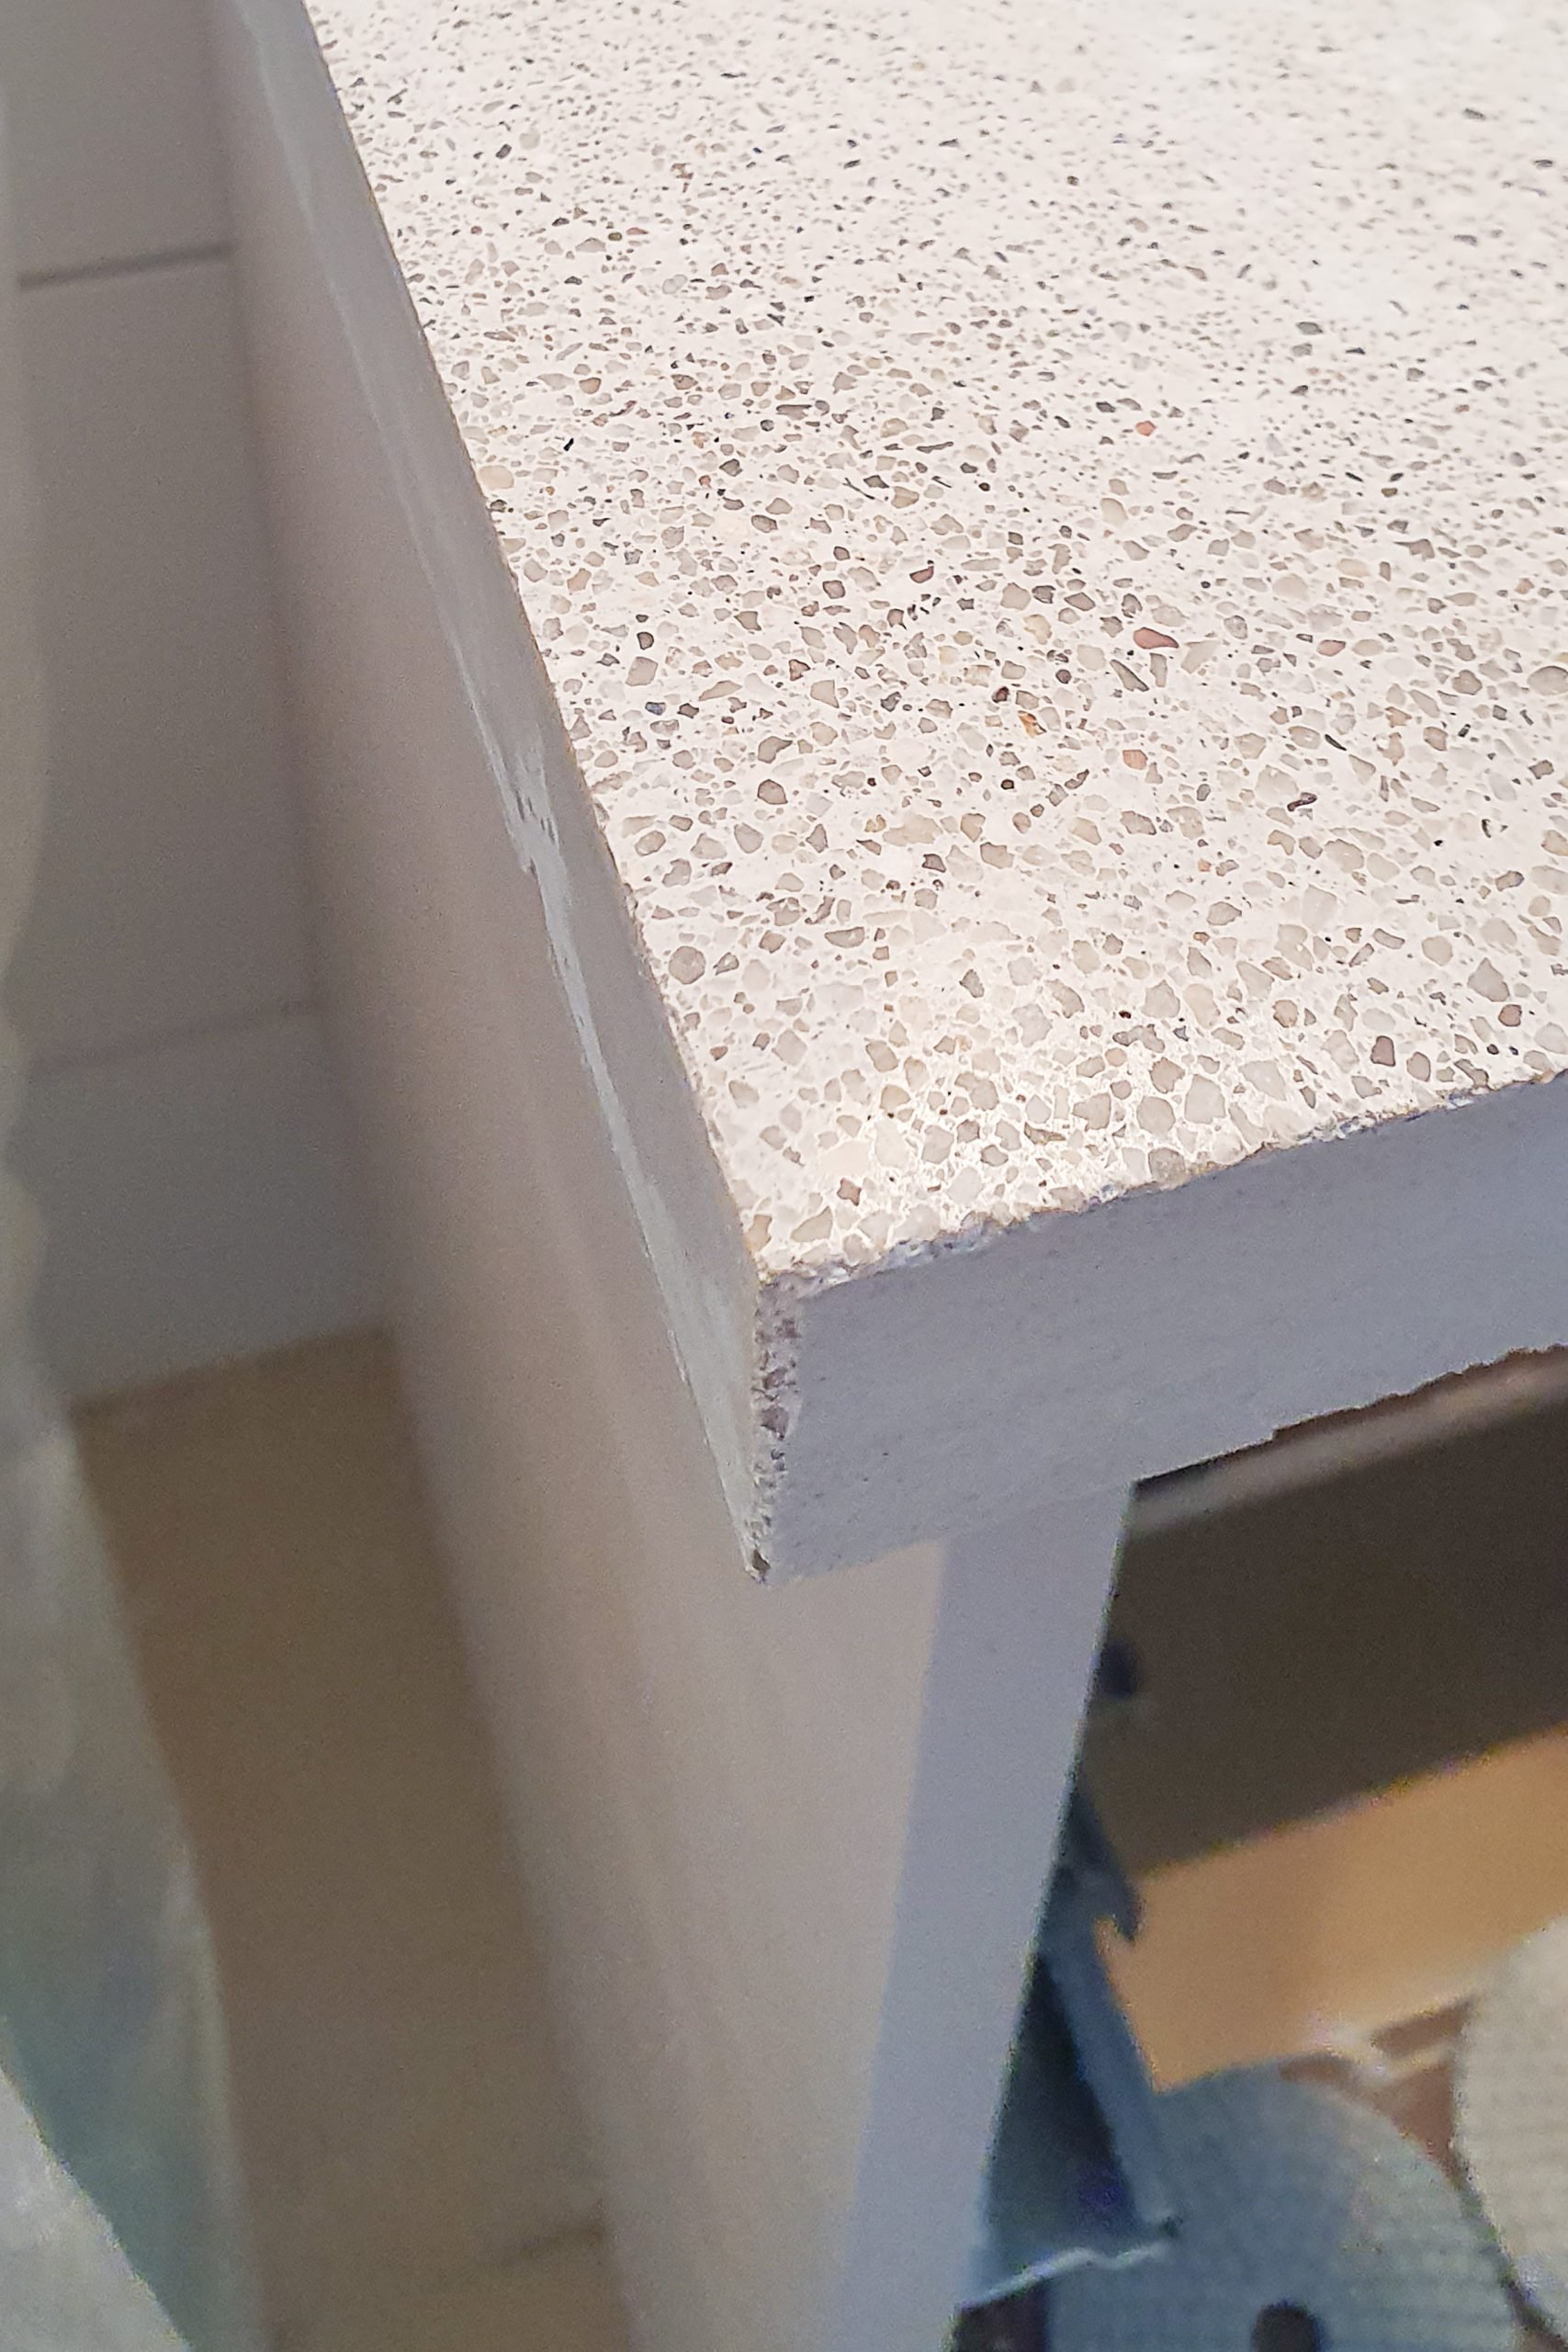 How To Build A Concrete Countertop | Little House On The Corner